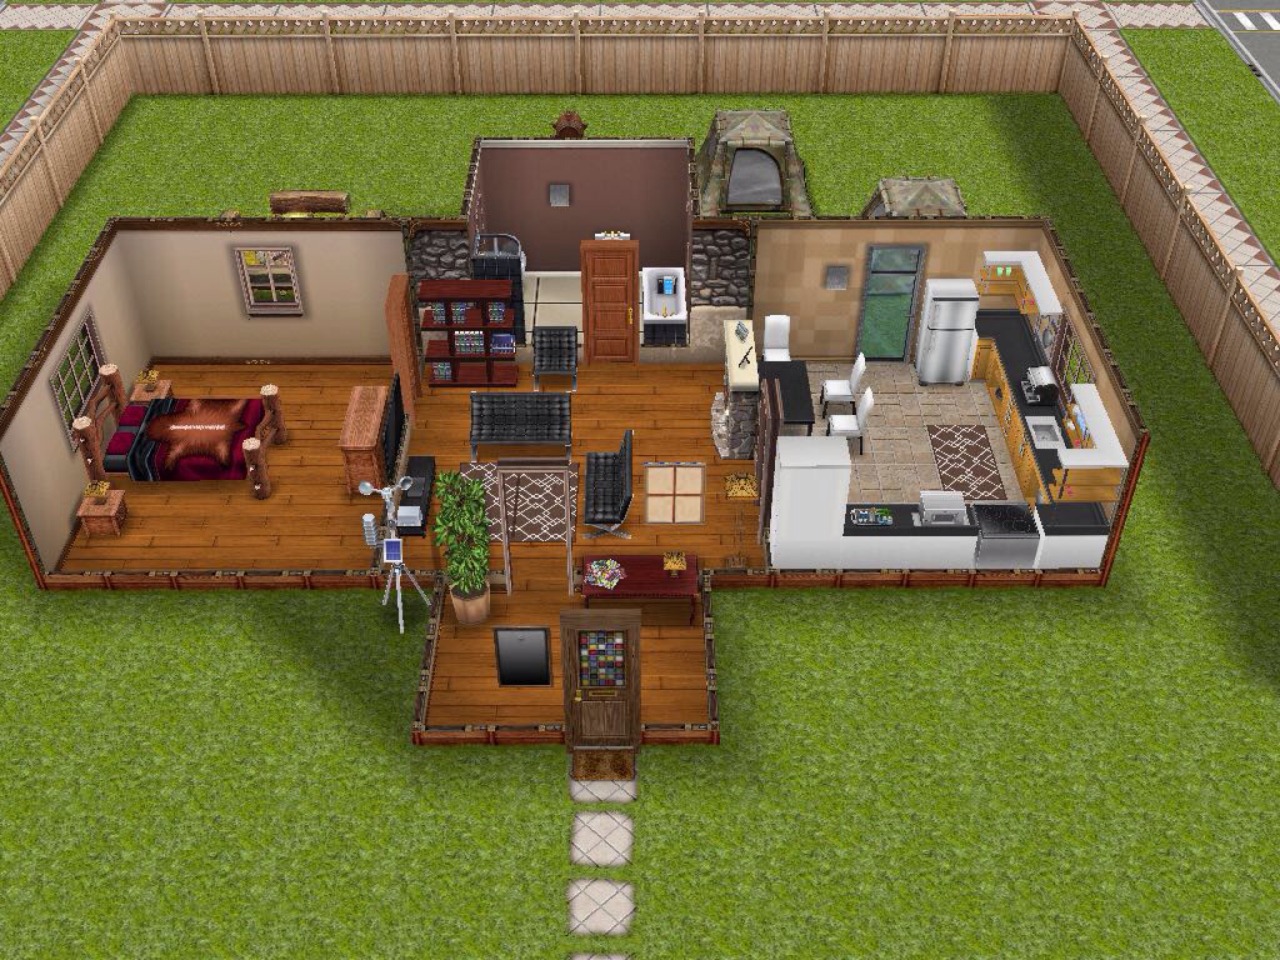 sims free play house designs 1 story